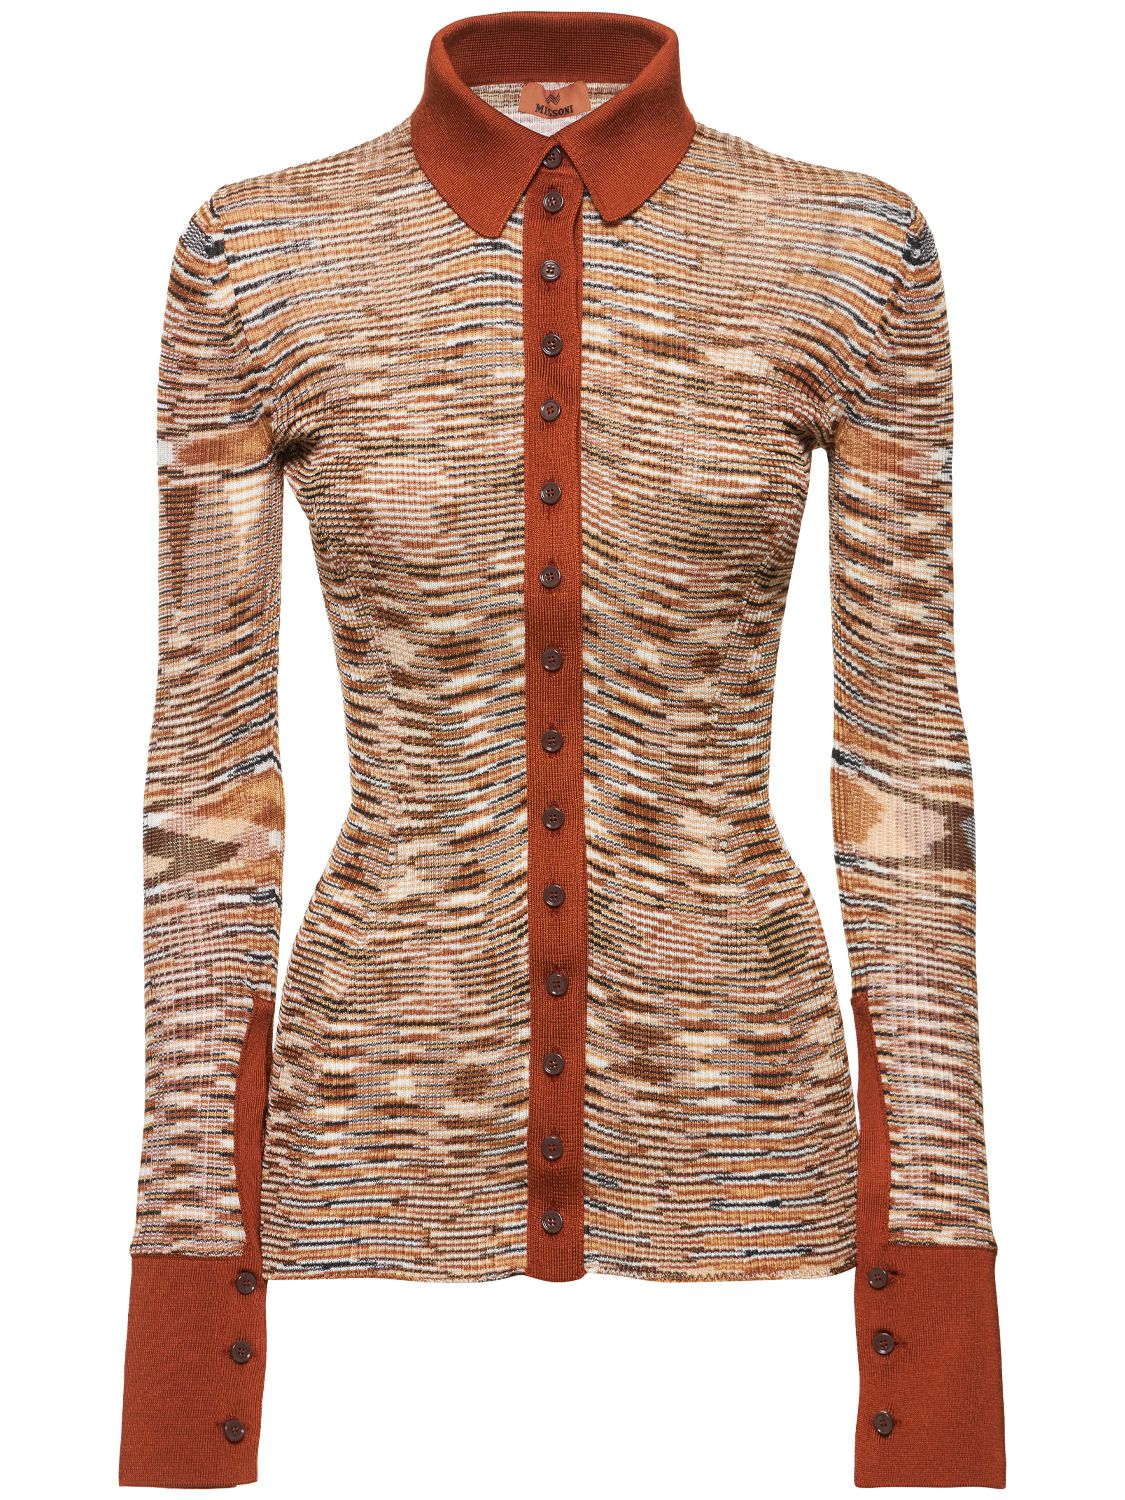 Missoni Space Dyed Rib Knit Stretch Tech Shirt In Multi,camel